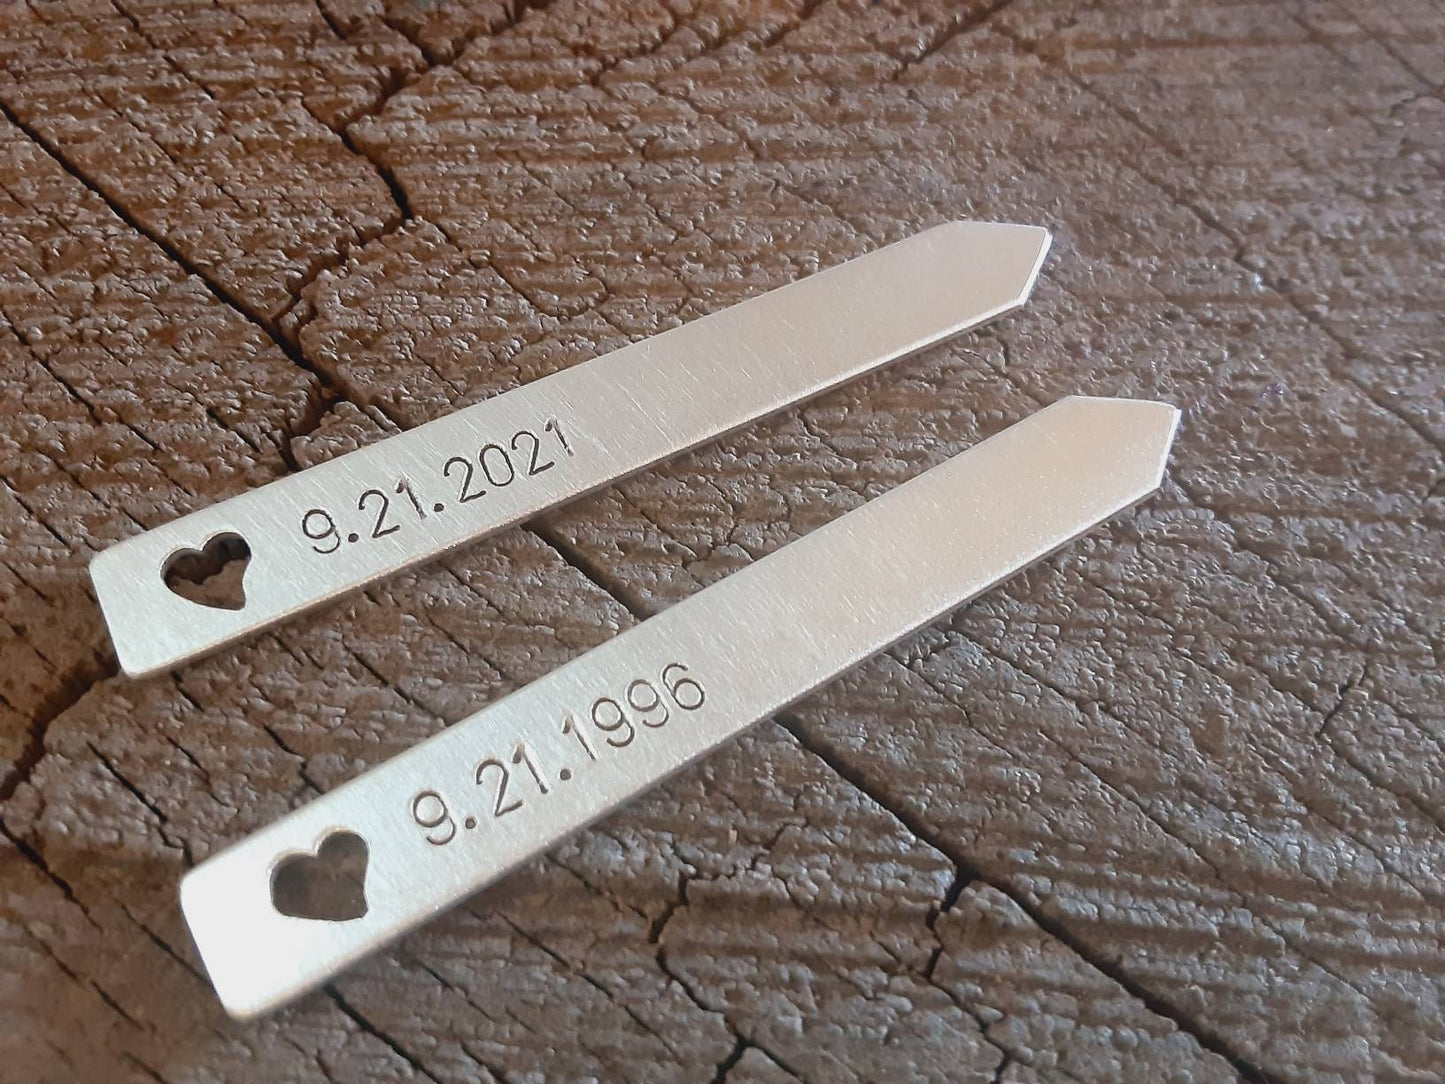 Sterling silver collar stays - great for silver 25th anniversary gift ideas